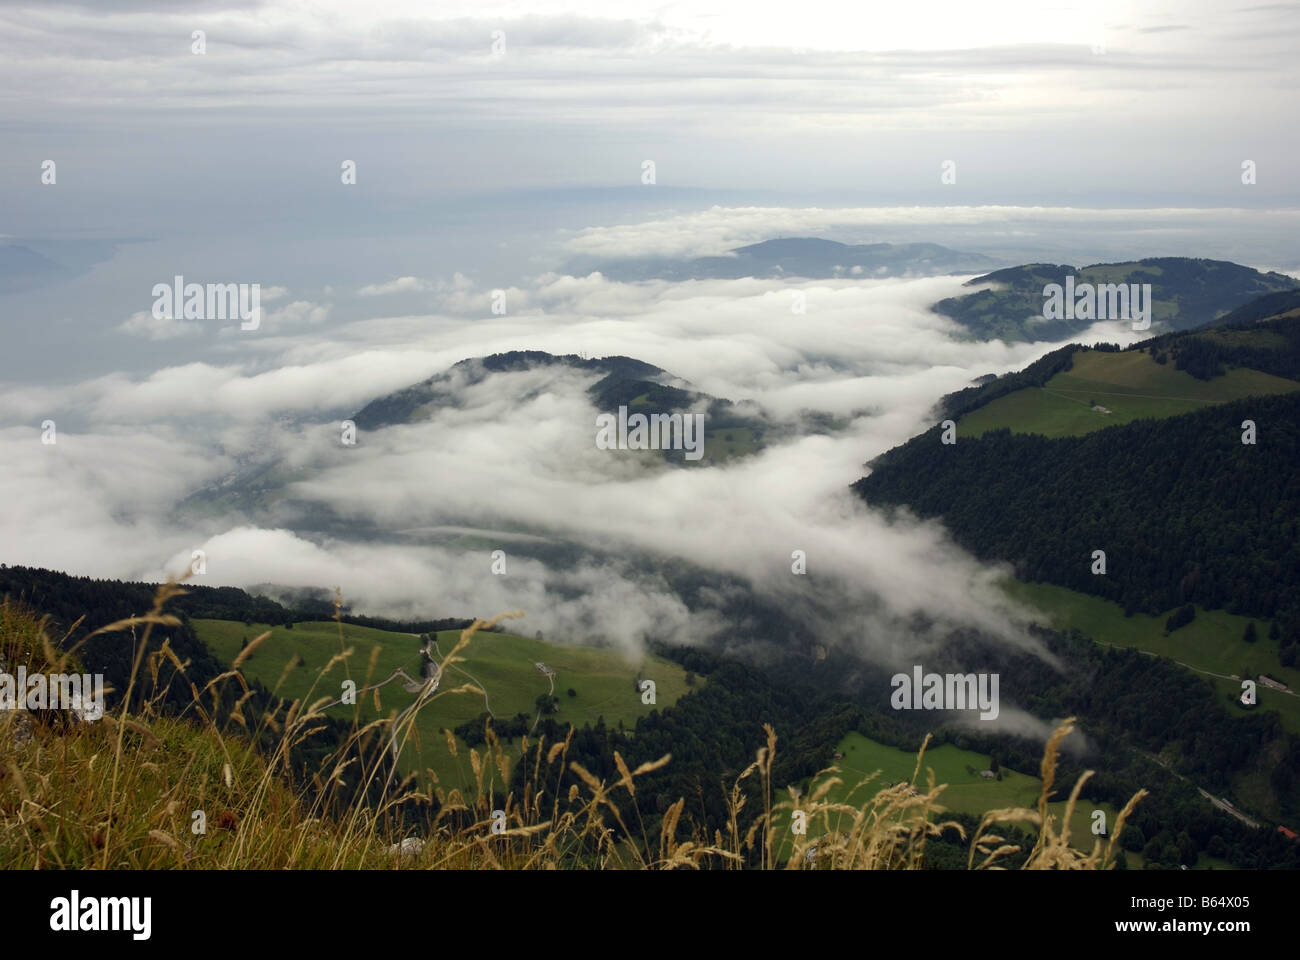 Switzerland's Bernese Alps with low cloud Photographed from the peak of La Dent de Jaman looking out over Lake Geneva Stock Photo